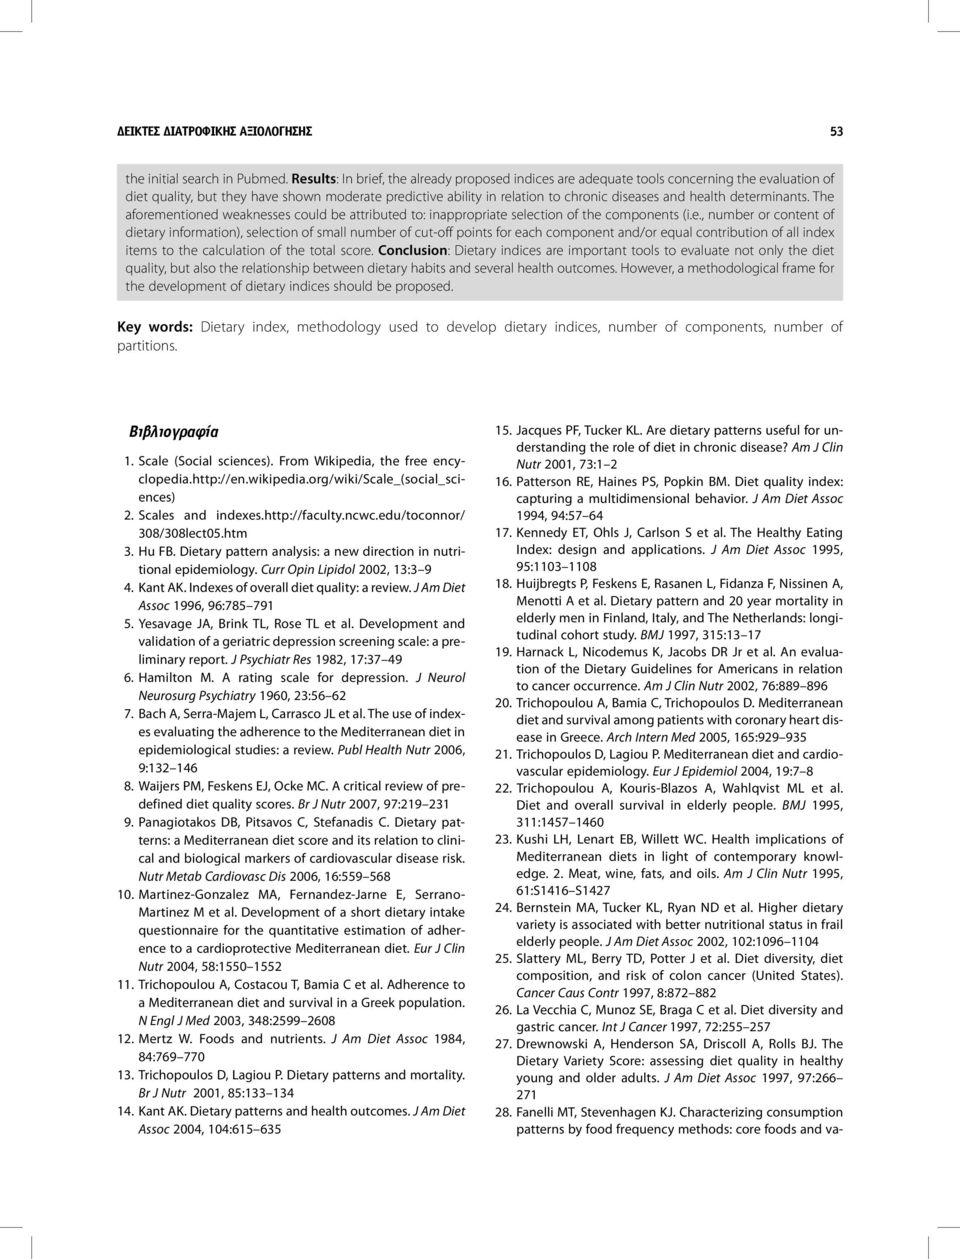 health determinants. The aforementioned weaknesses could be attributed to: inappropriate selection of the components (i.e., number or content of dietary information), selection of small number of cut-off points for each component and/or equal contribution of all index items to the calculation of the total score.